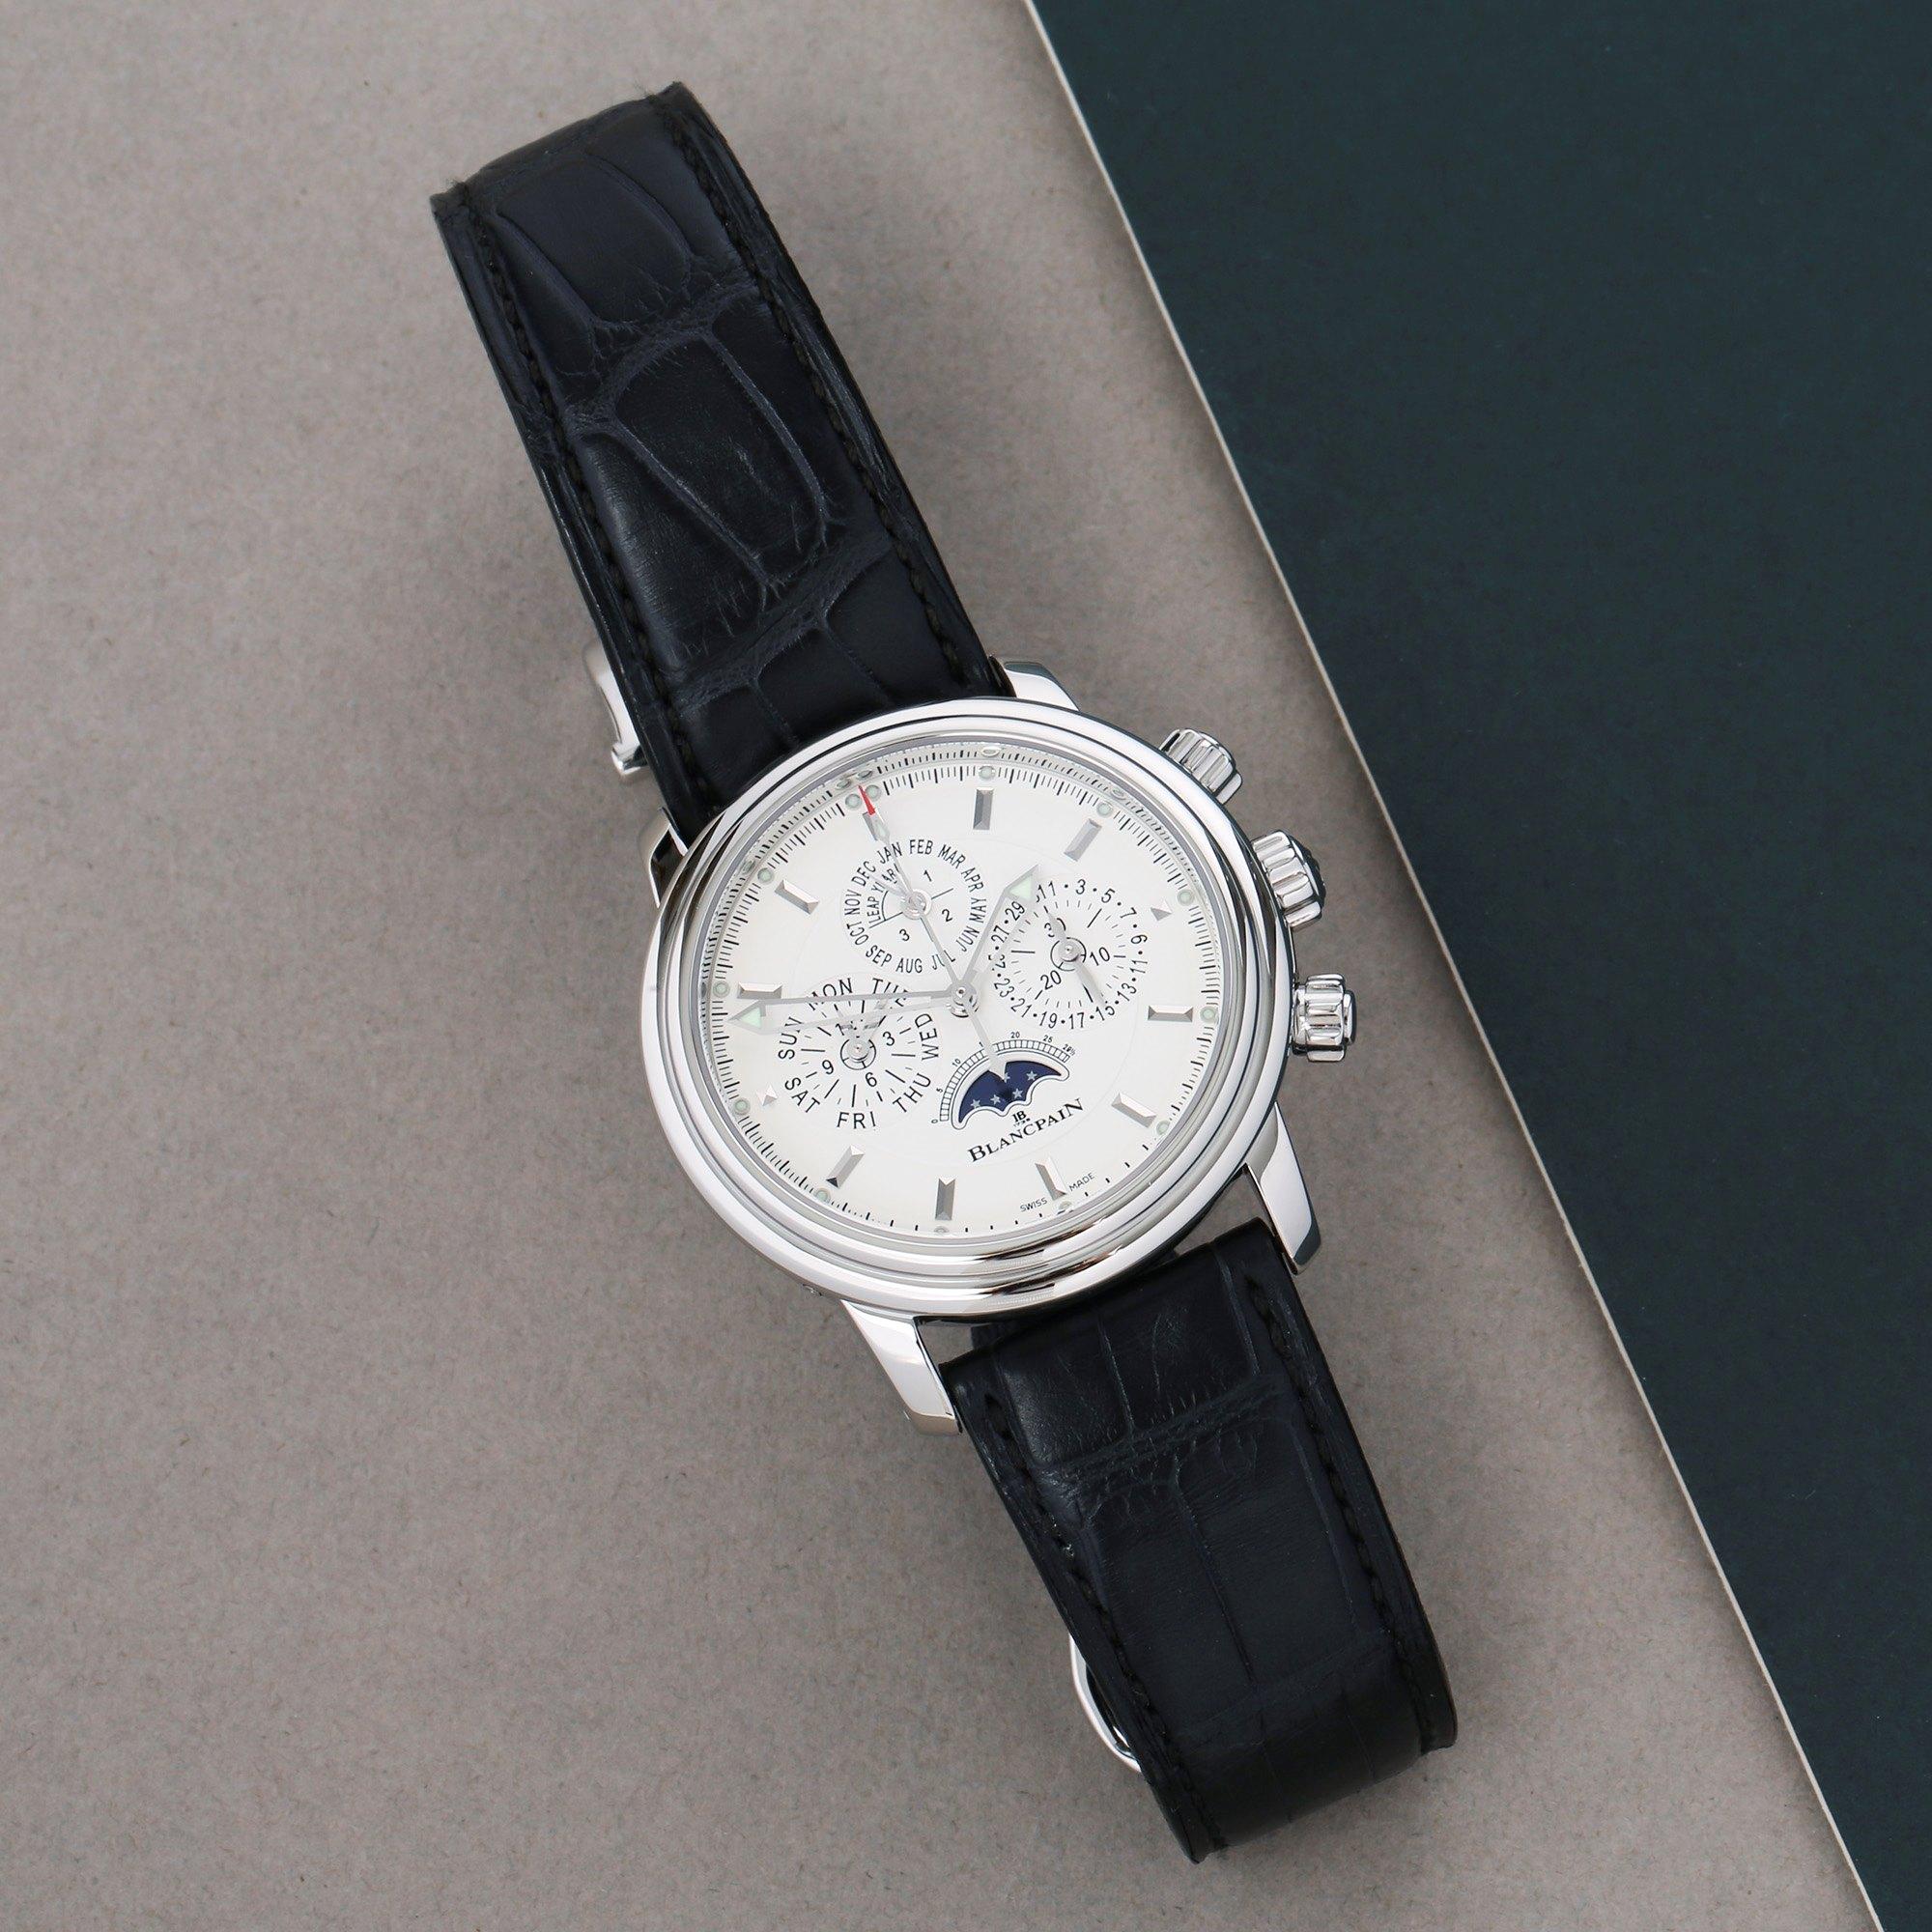 Xupes Reference: COM002596
Manufacturer: Blancpain
Model: Leman
Model Variant: 0
Model Number: 2685F-1127-53B
Age: 2010
Gender: Men
Complete With: Blancpain Box, Manuals & Open Guarantee 
Dial: White Baton 
Glass: Sapphire Crystal
Case Material: